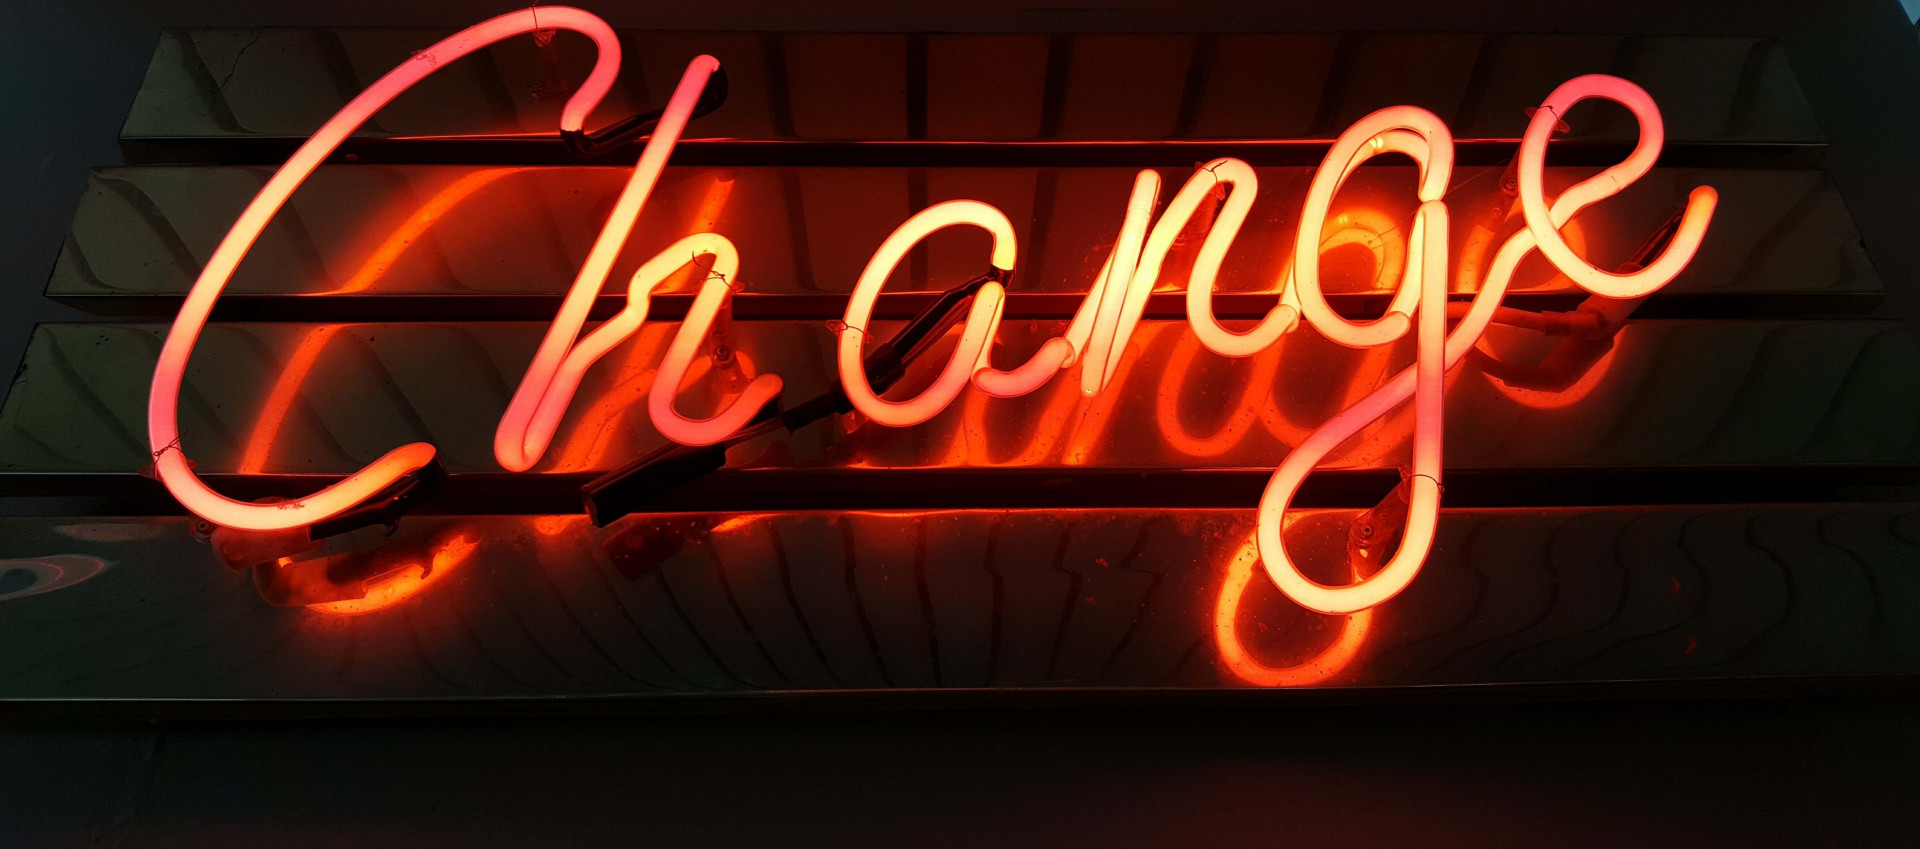 the word "change" lit up in red neon colour on a dark background